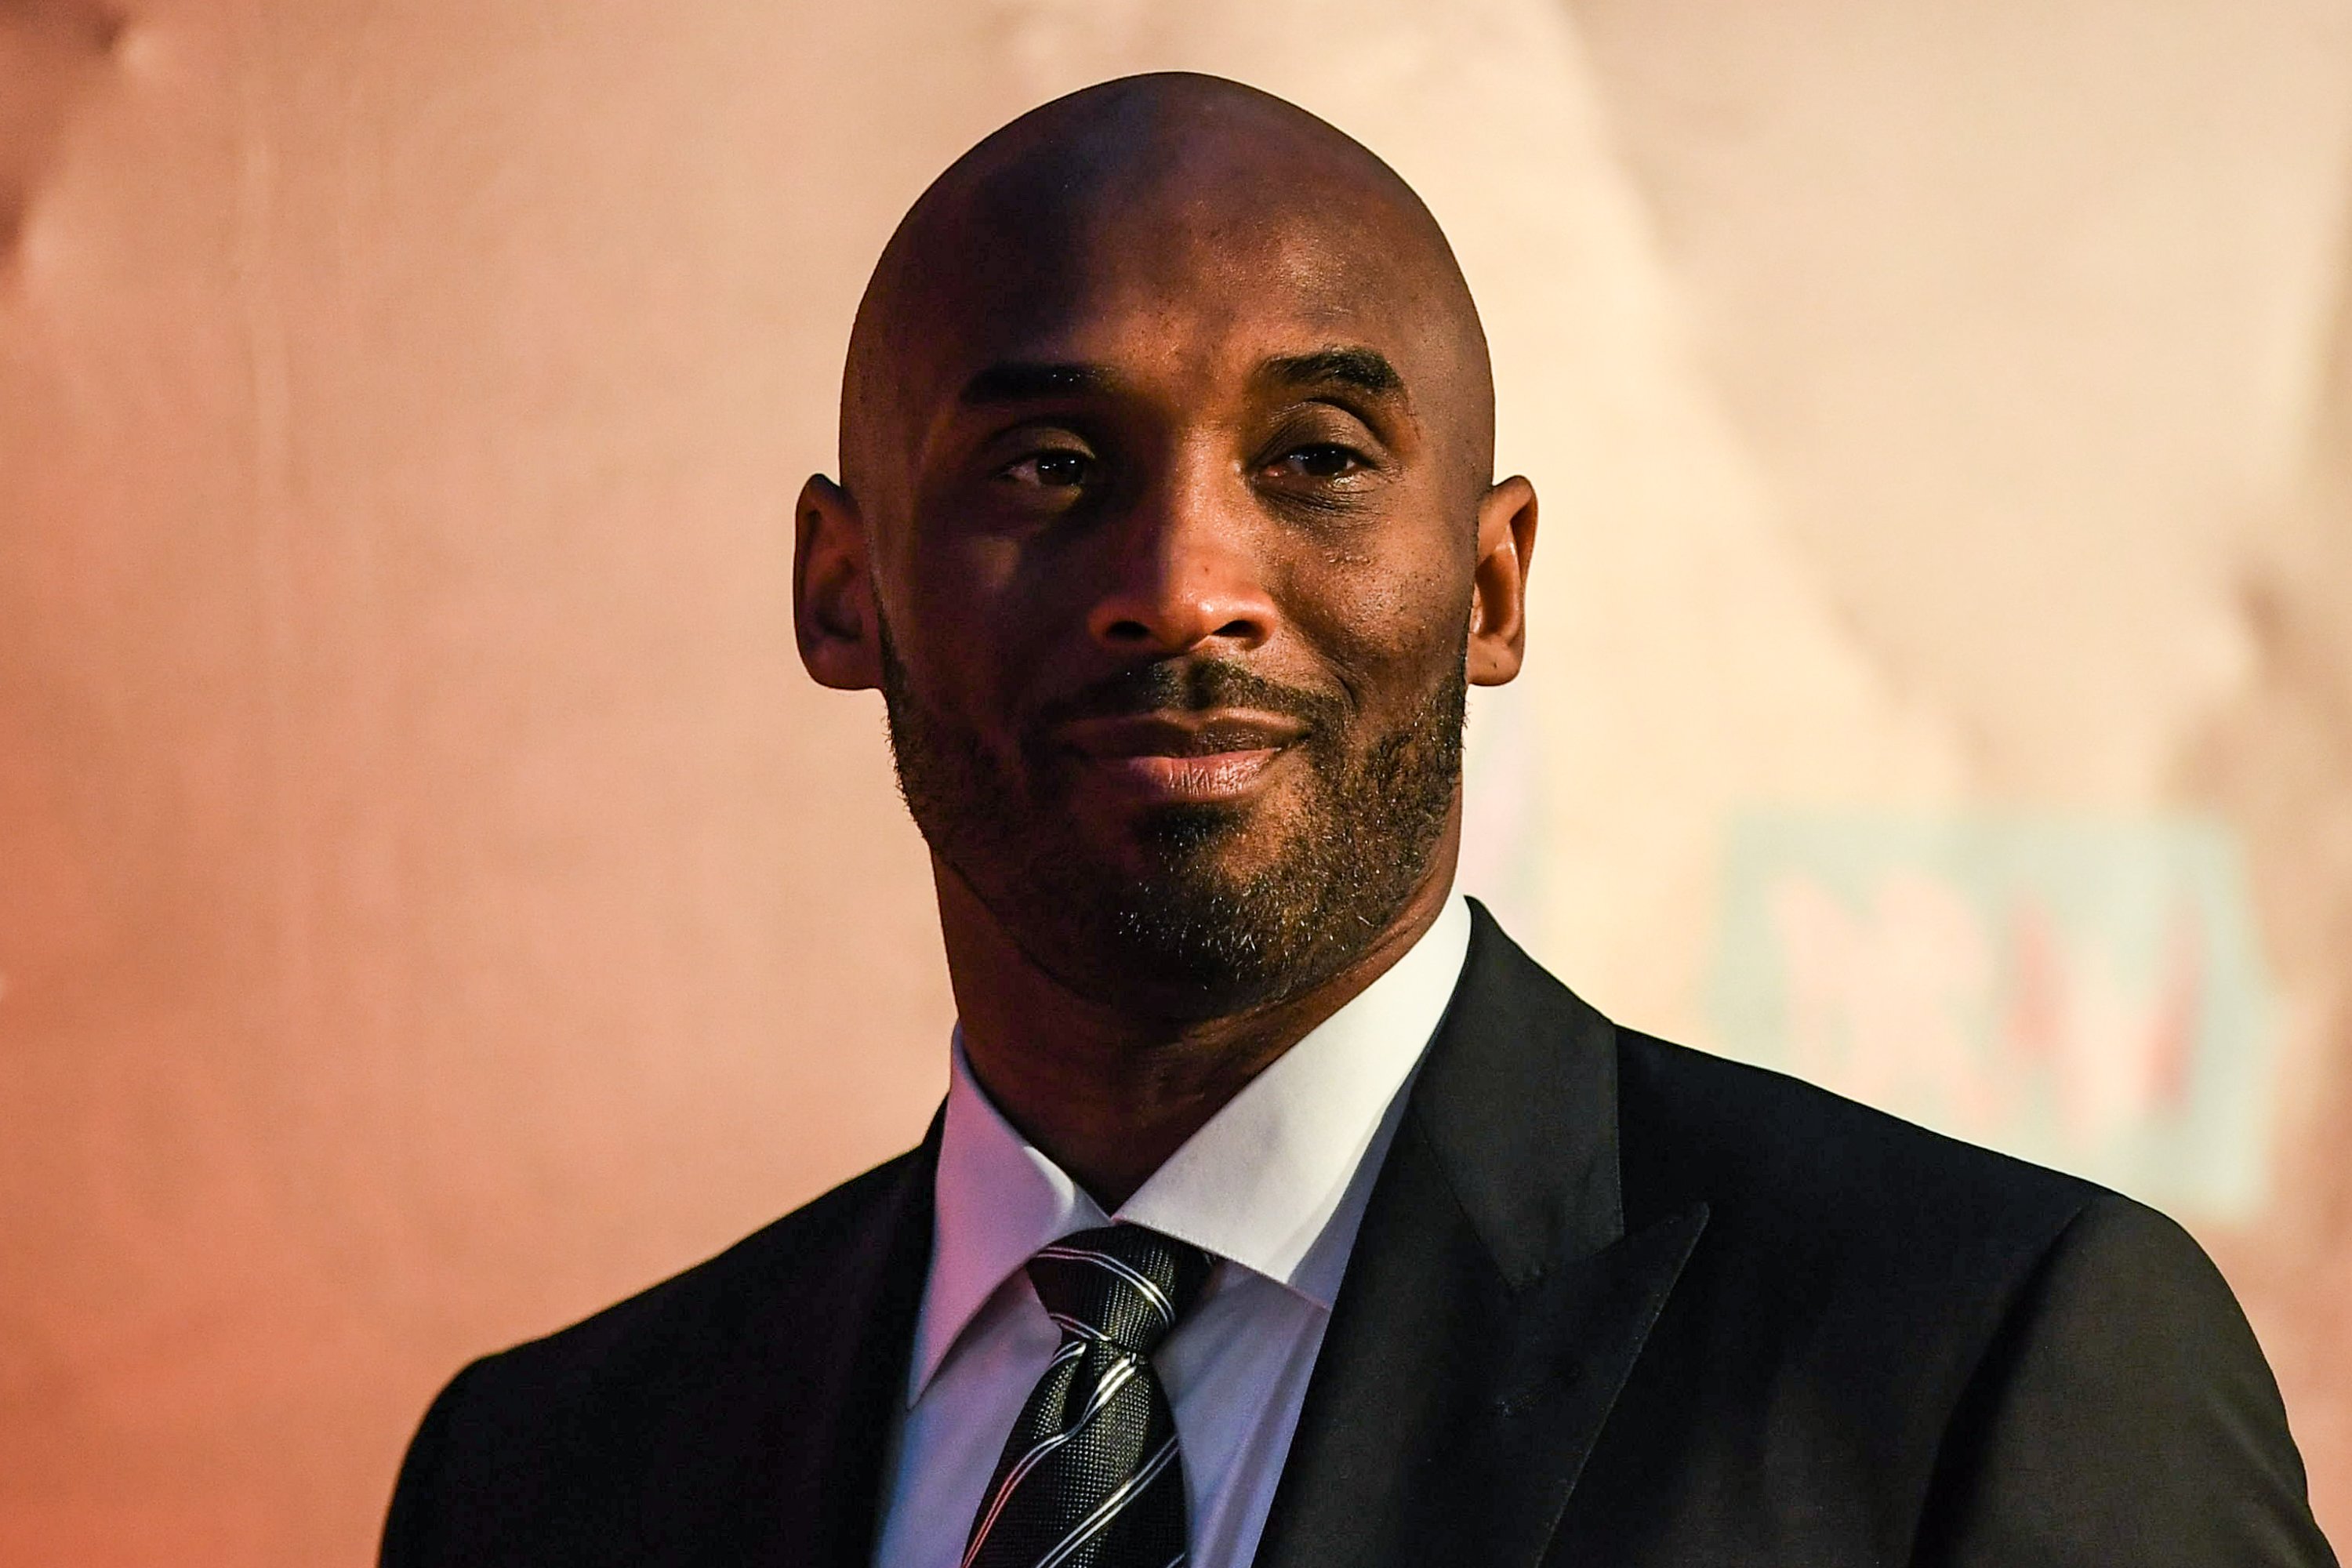 Kobe Bryant at the FIBA Basketball World Cup 2019 Draw Ceremony on March 16, 2019. | Photo: Getty Images